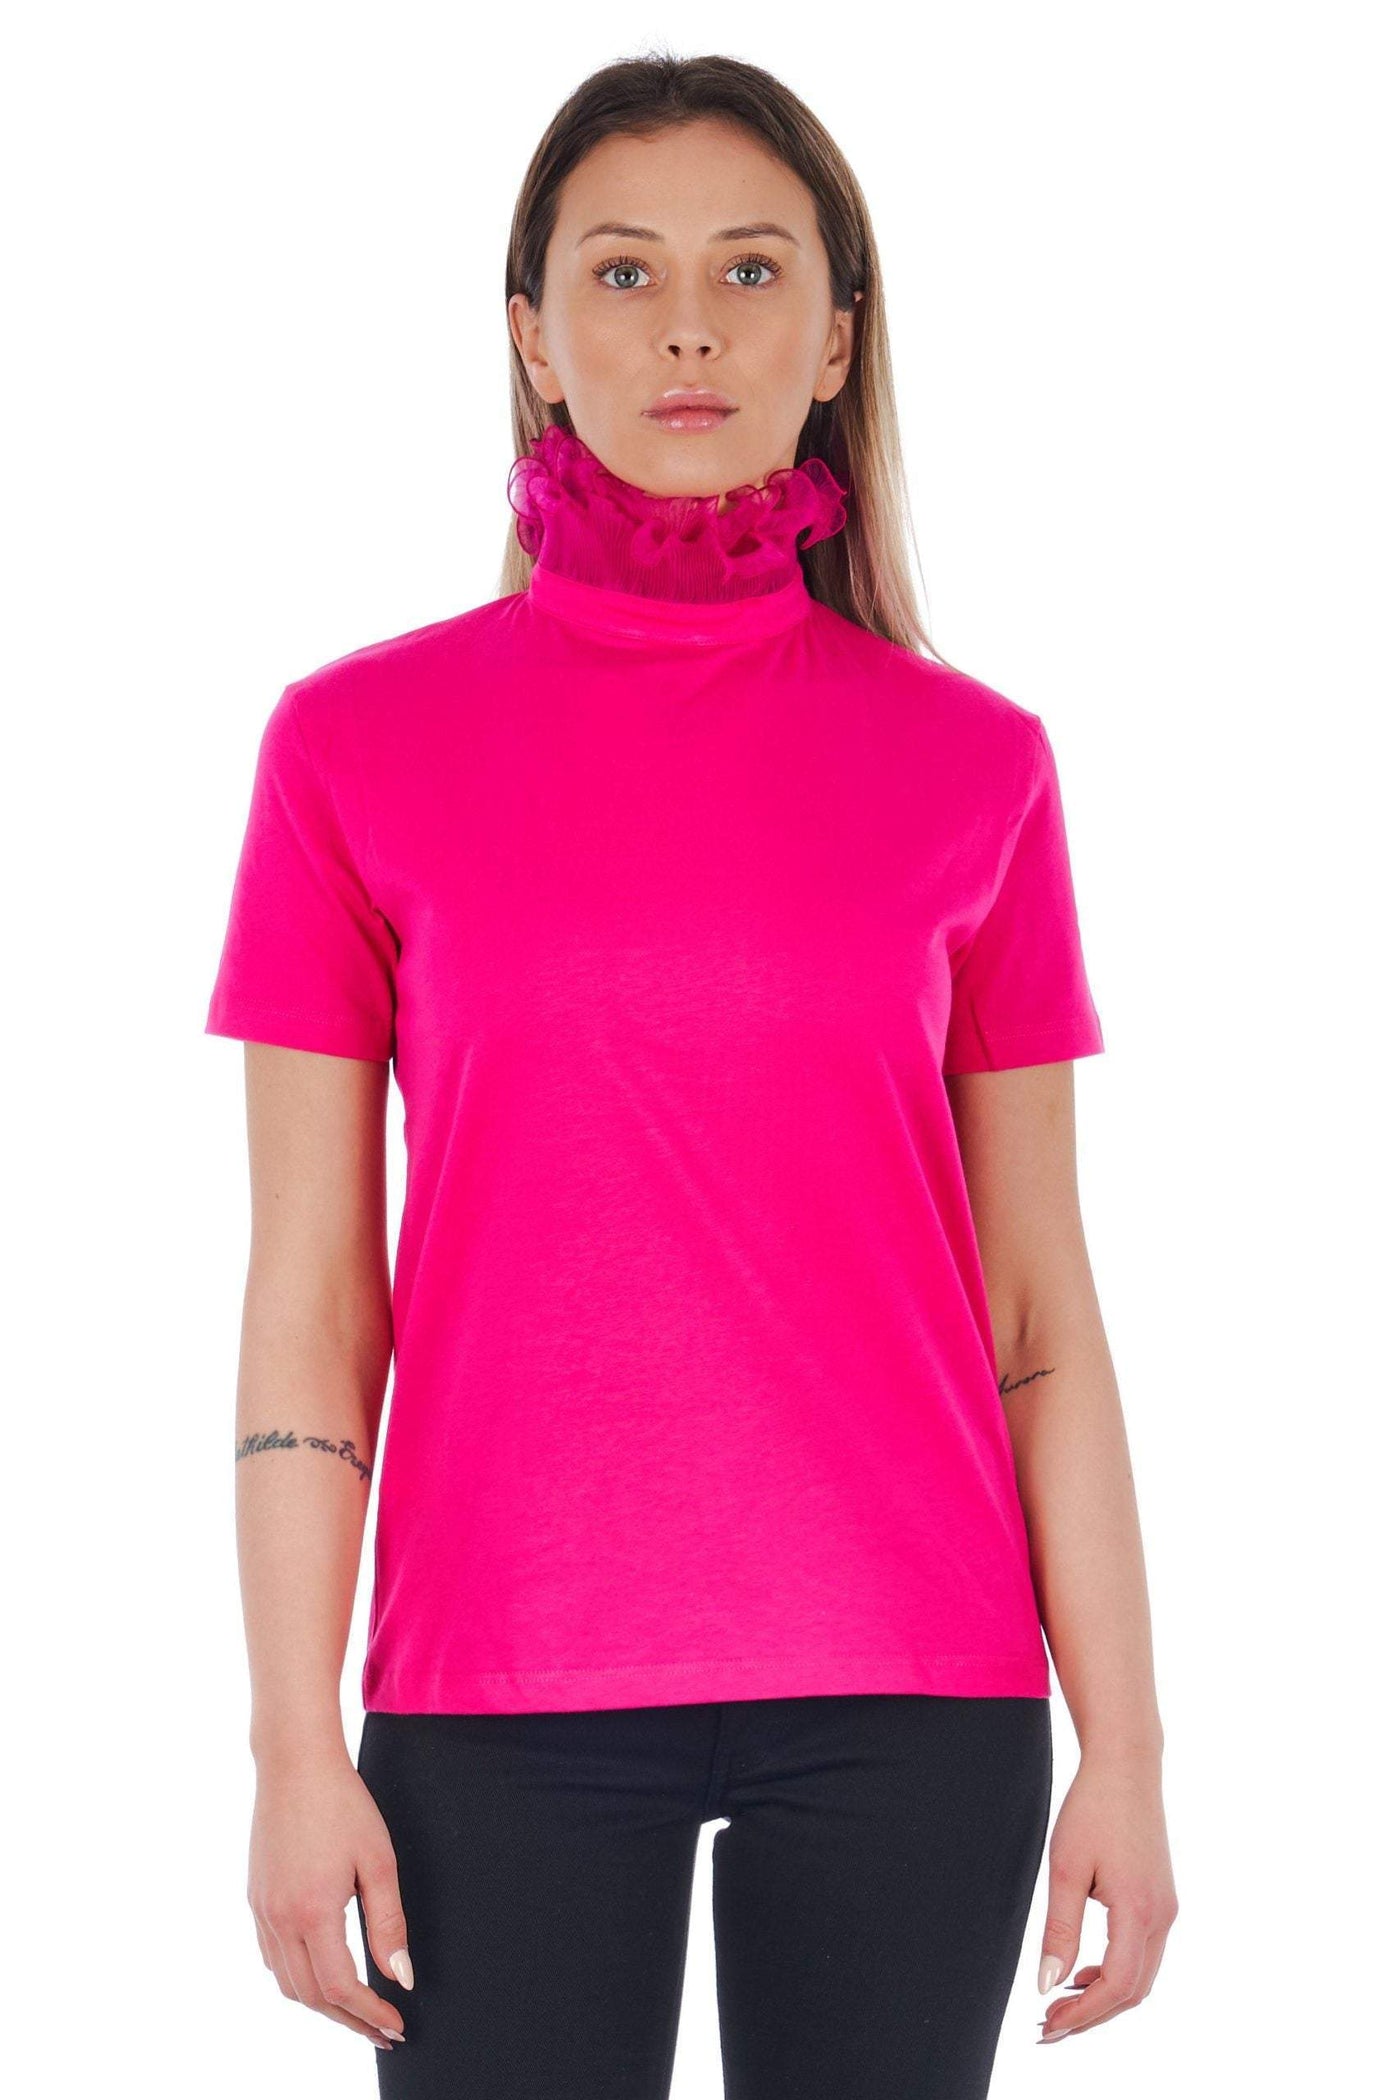 Frankie Morello high   neck short sleeve  Tops & T-Shirt #women, feed-agegroup-adult, feed-color-Pink, feed-gender-female, Frankie Morello, L, M, Pink, S, Tops & T-Shirts - Women - Clothing, XS, XXS at SEYMAYKA